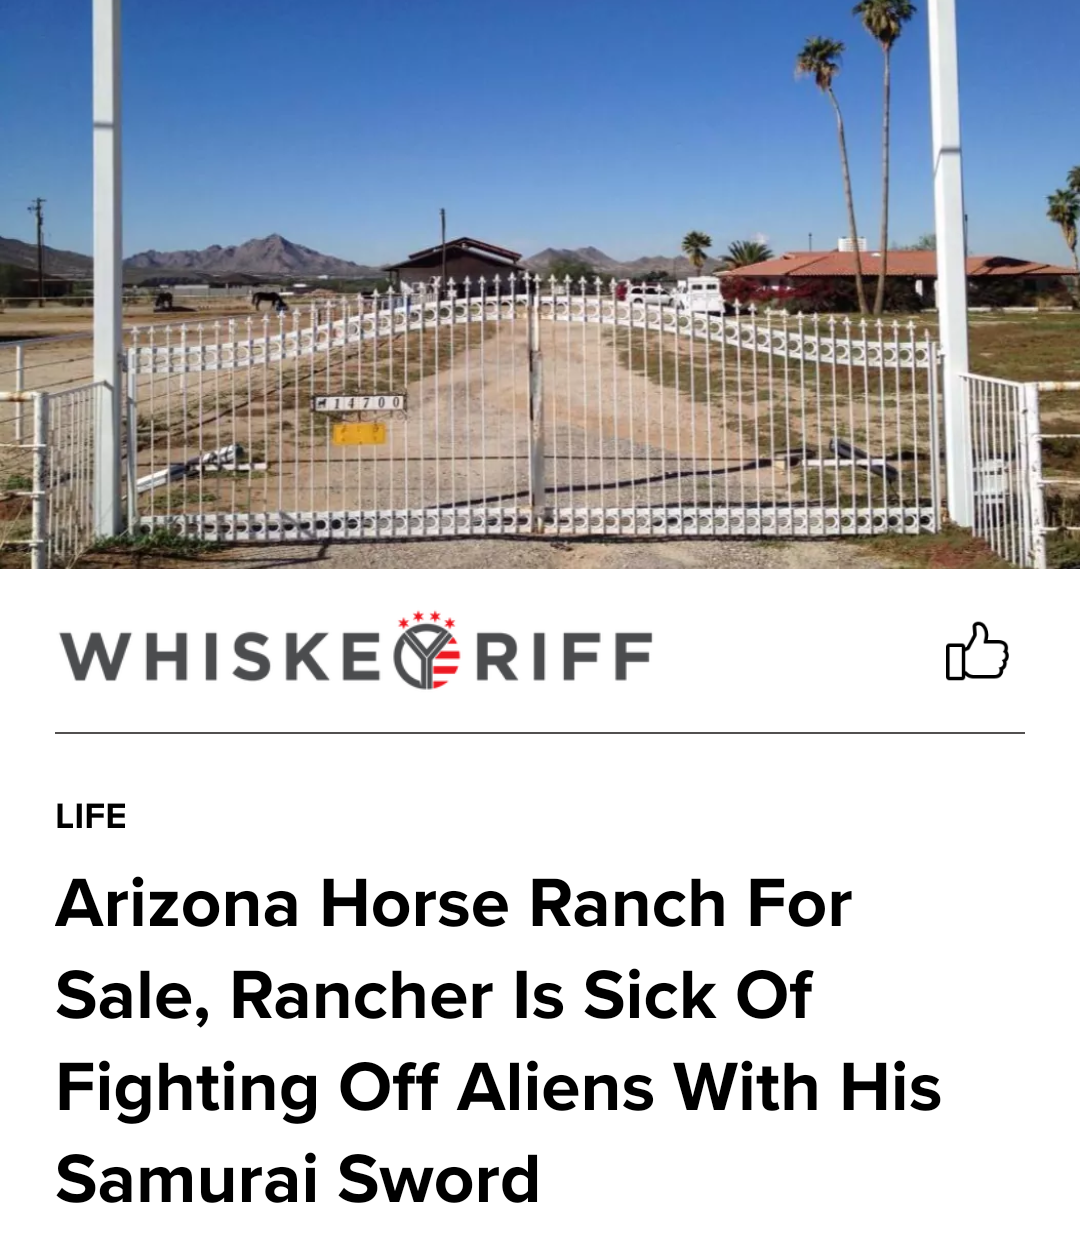 memes - alien ranch - Whiskeriff Life Arizona Horse Ranch For Sale, Rancher Is Sick Of Fighting Off Aliens With His Samurai Sword